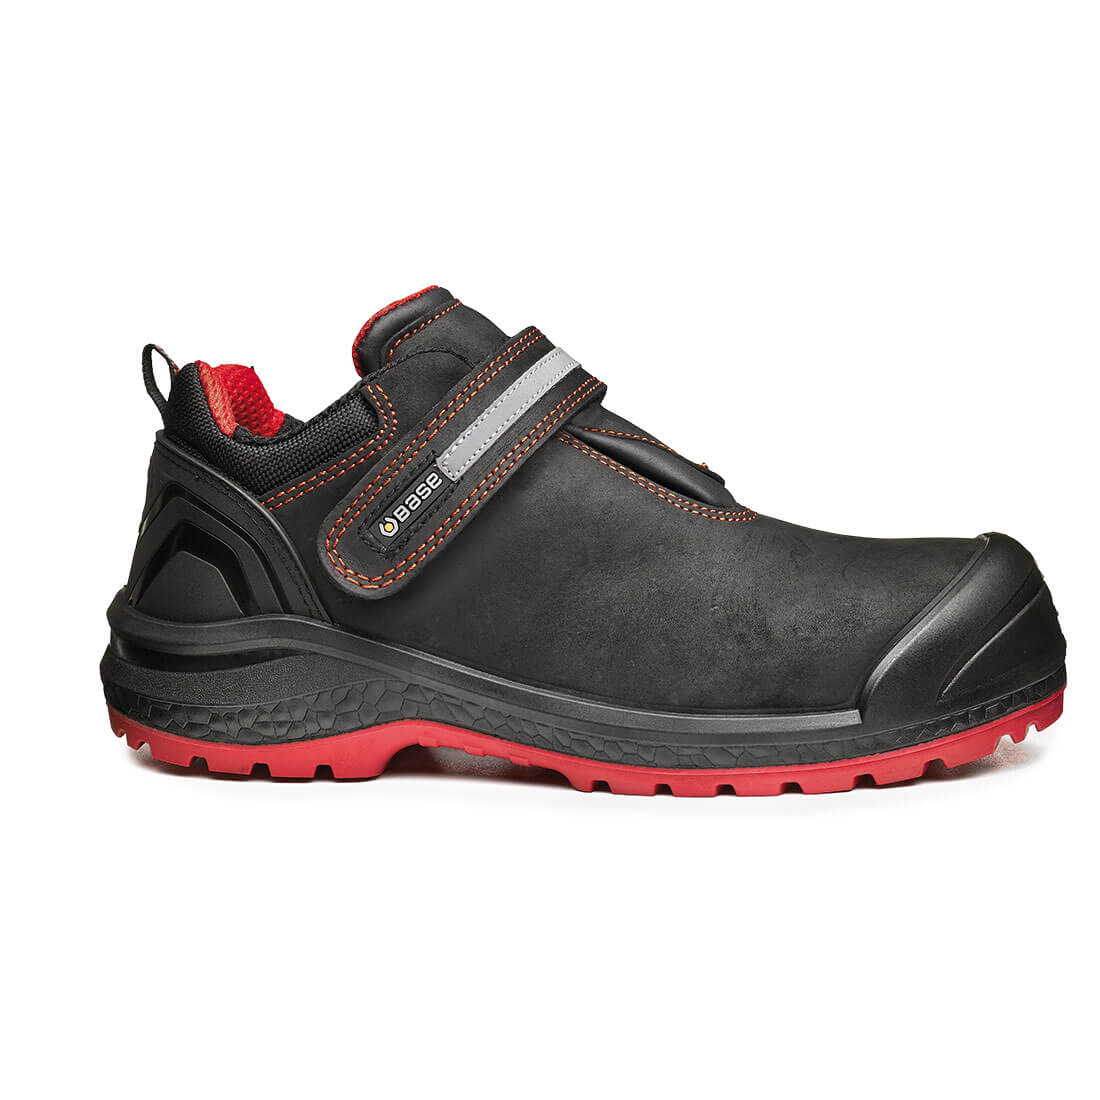 Base Twinkle Toe Cap Work Safety Shoes Black/Red 1#colour_black-red